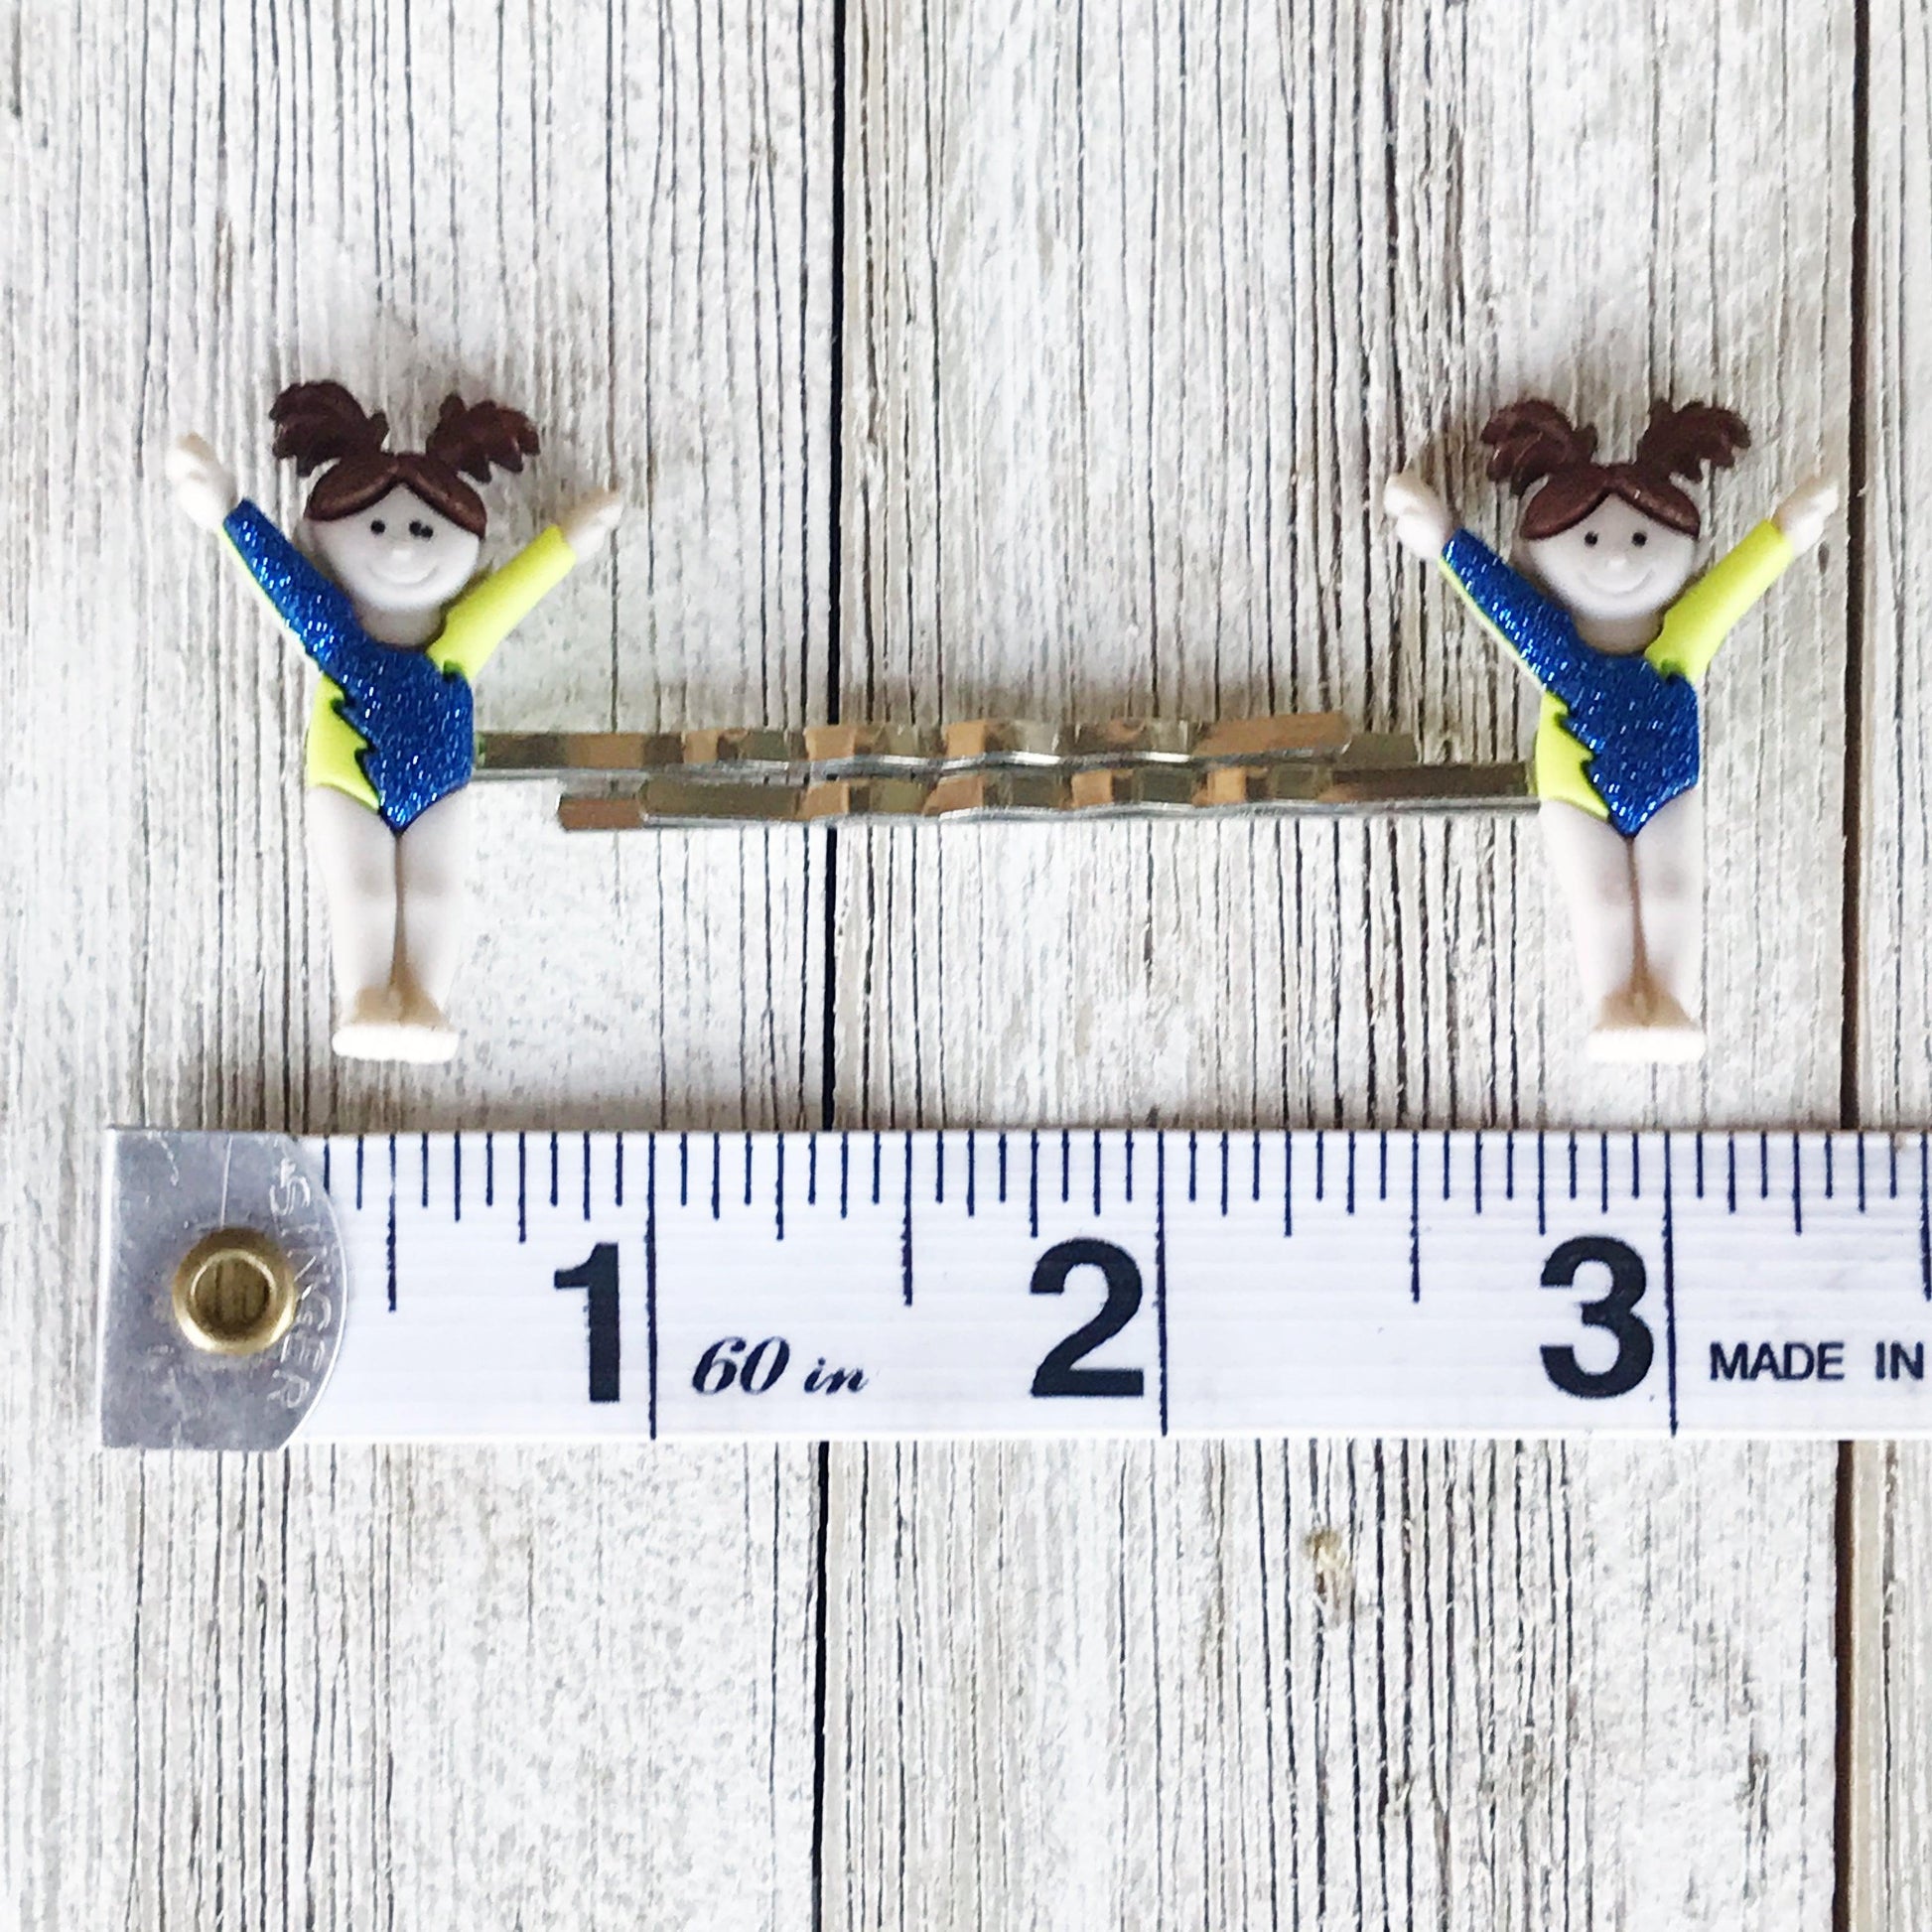 Set of 2 Gymnasts Hair Pins - Cheerful Accessories for Gymnastics Enthusiasts